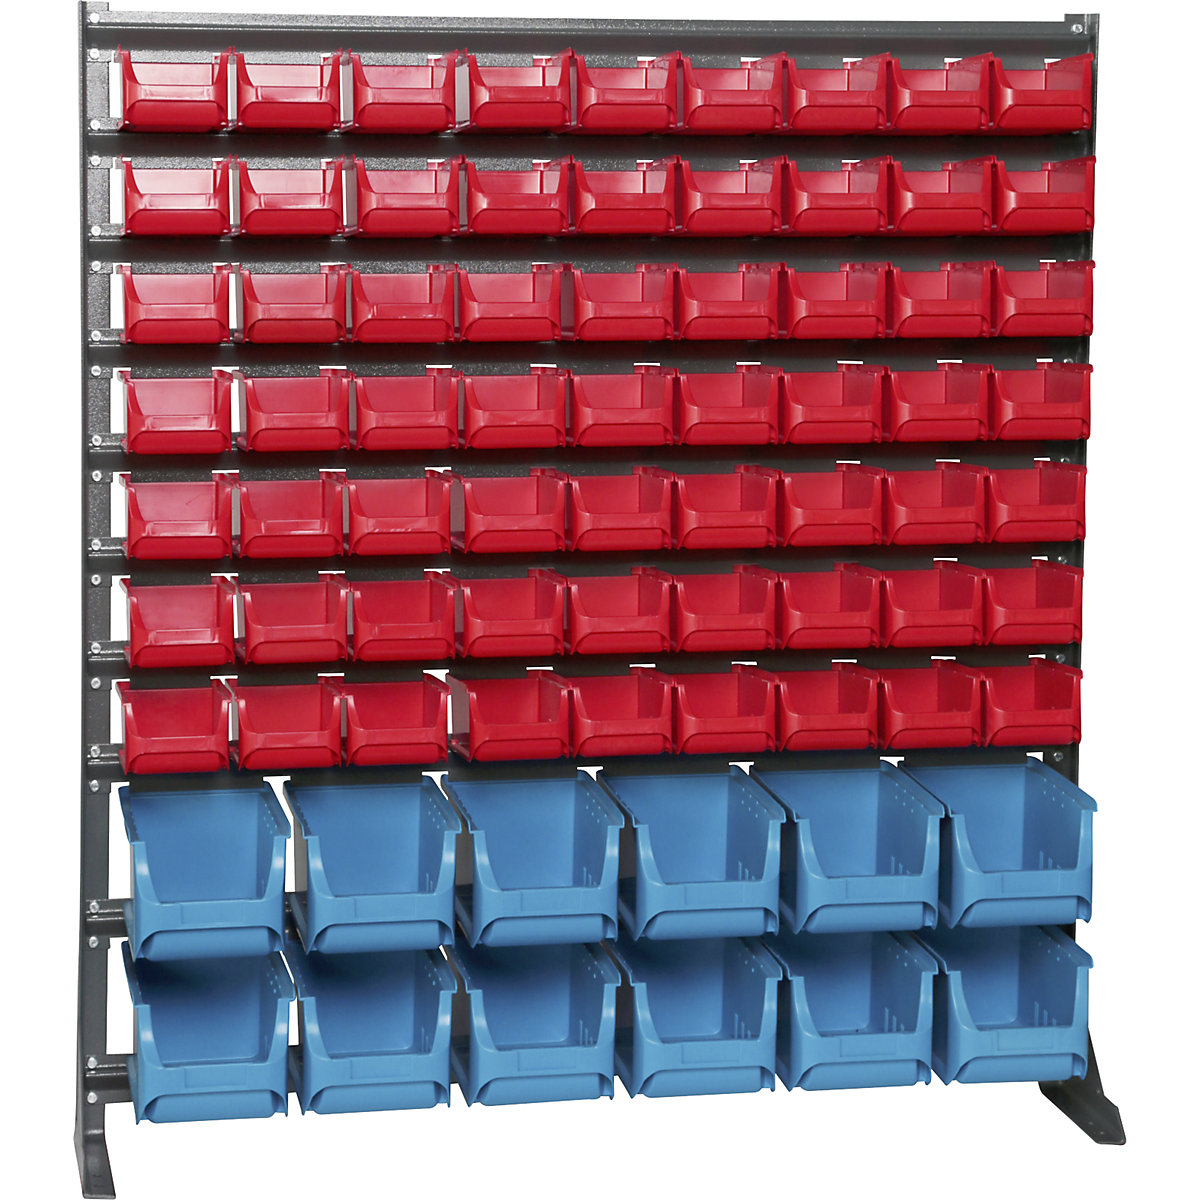 Small parts shelf unit, width 1020 mm, with open fronted storage bins, HxD 1110 x 235 mm-5